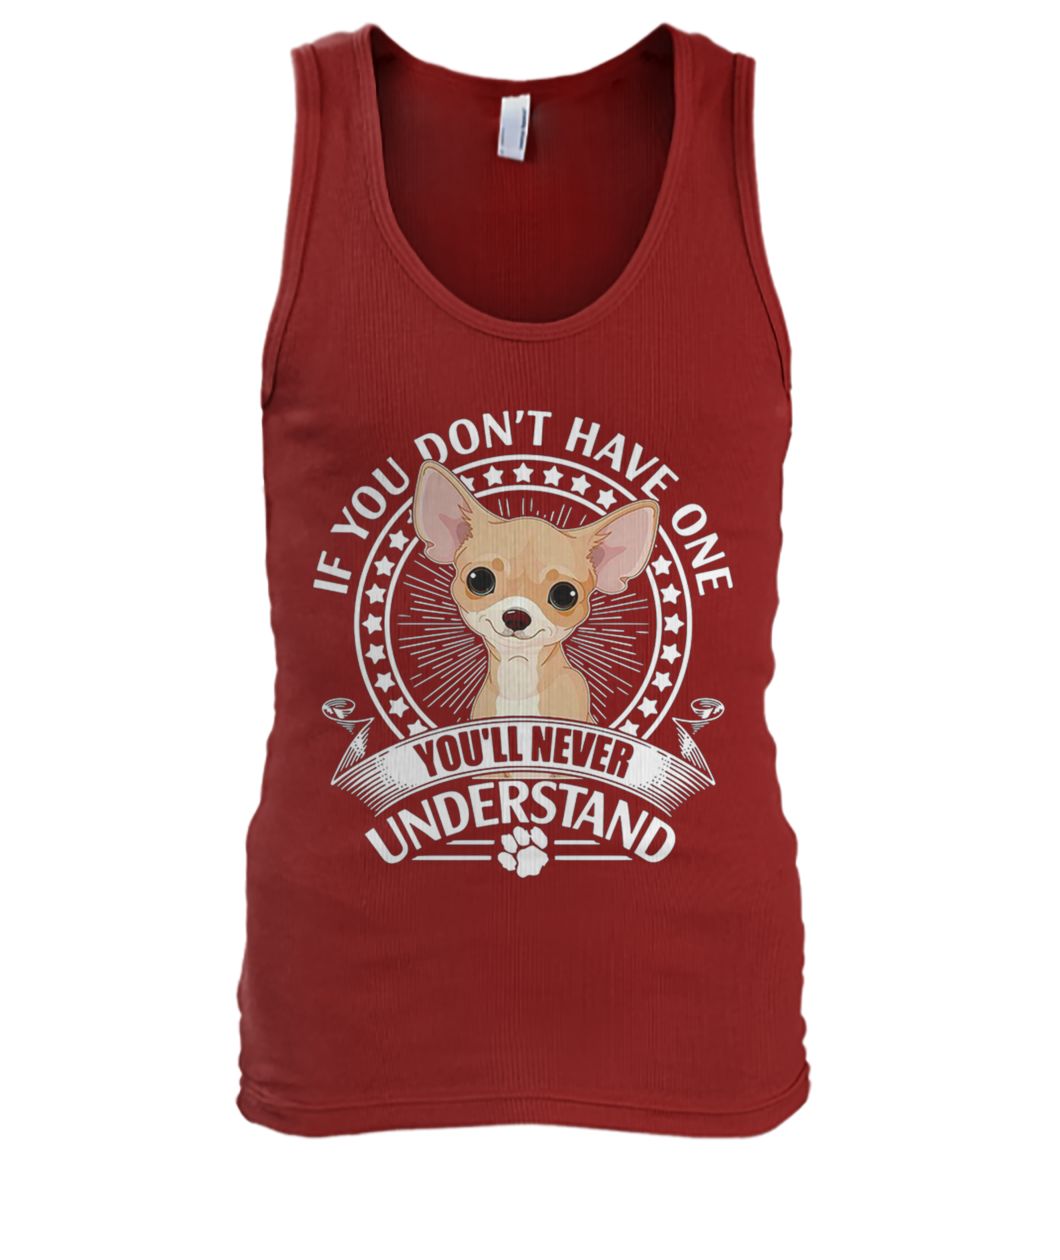 If you don't have one chihuahua you'll never understand men's tank top